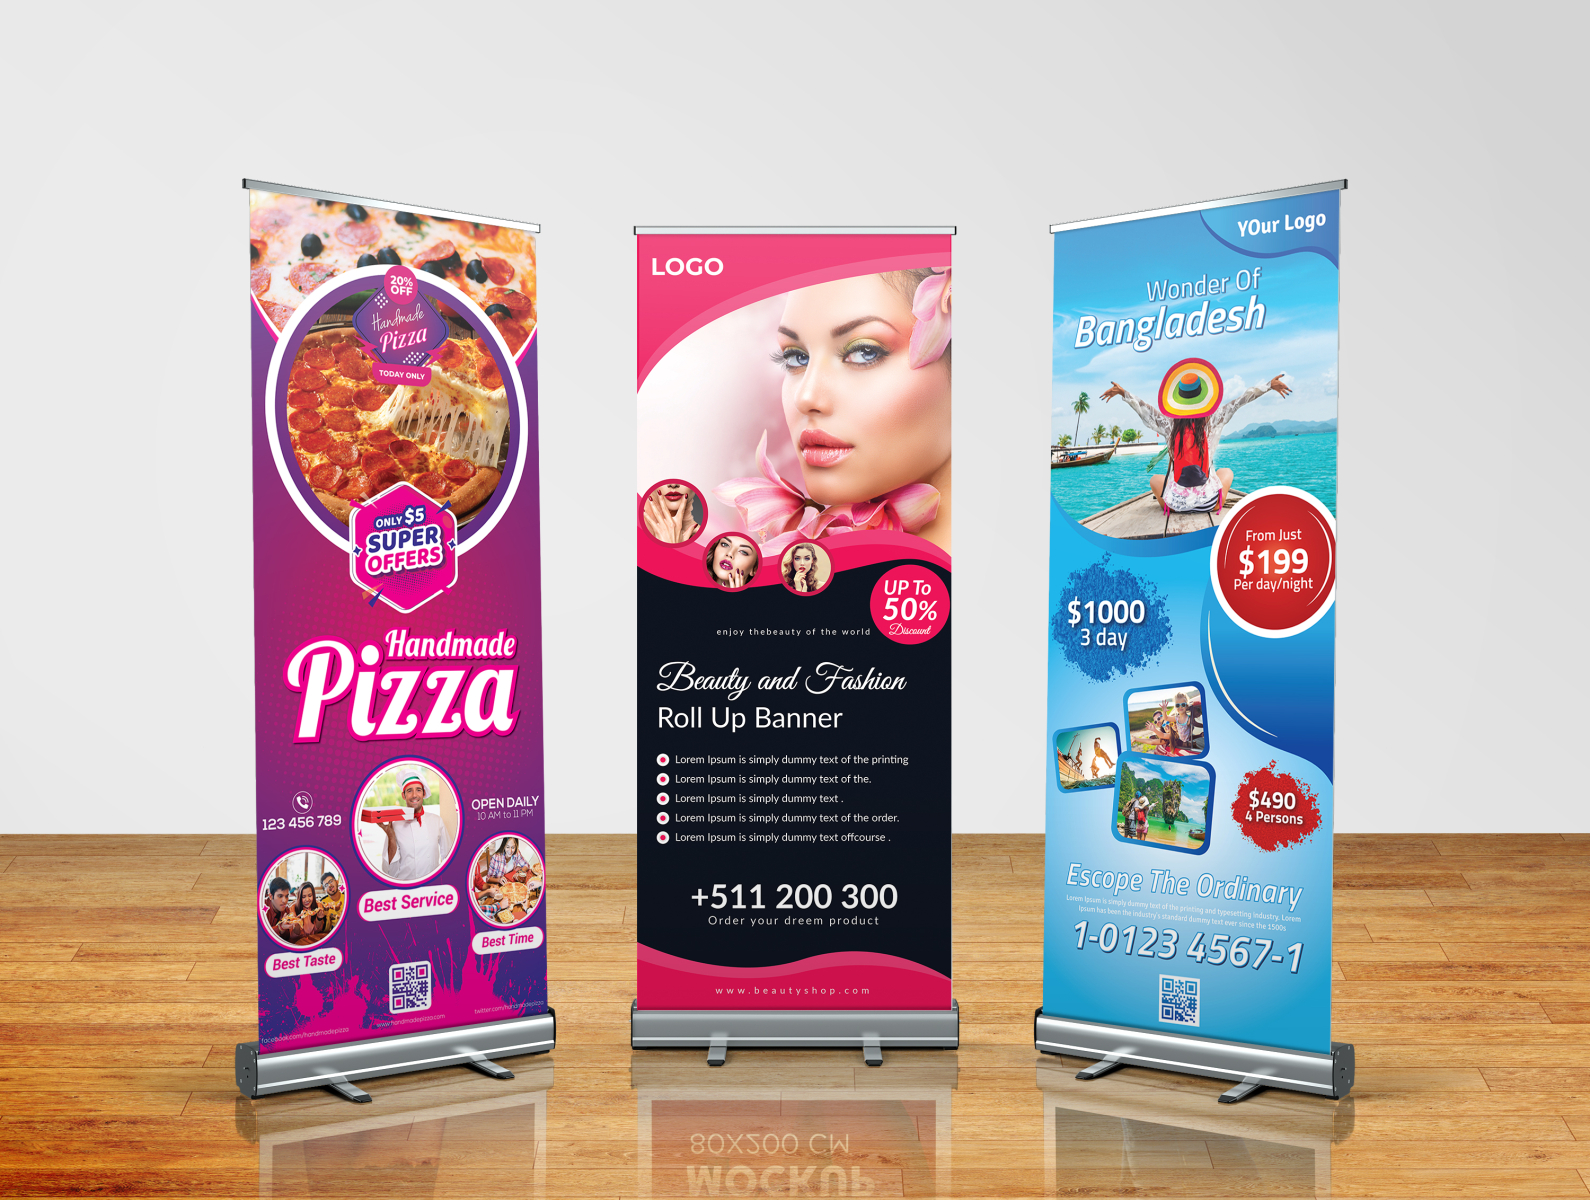 Creative Roll Up Banner Design by Golam Rabbani on Dribbble